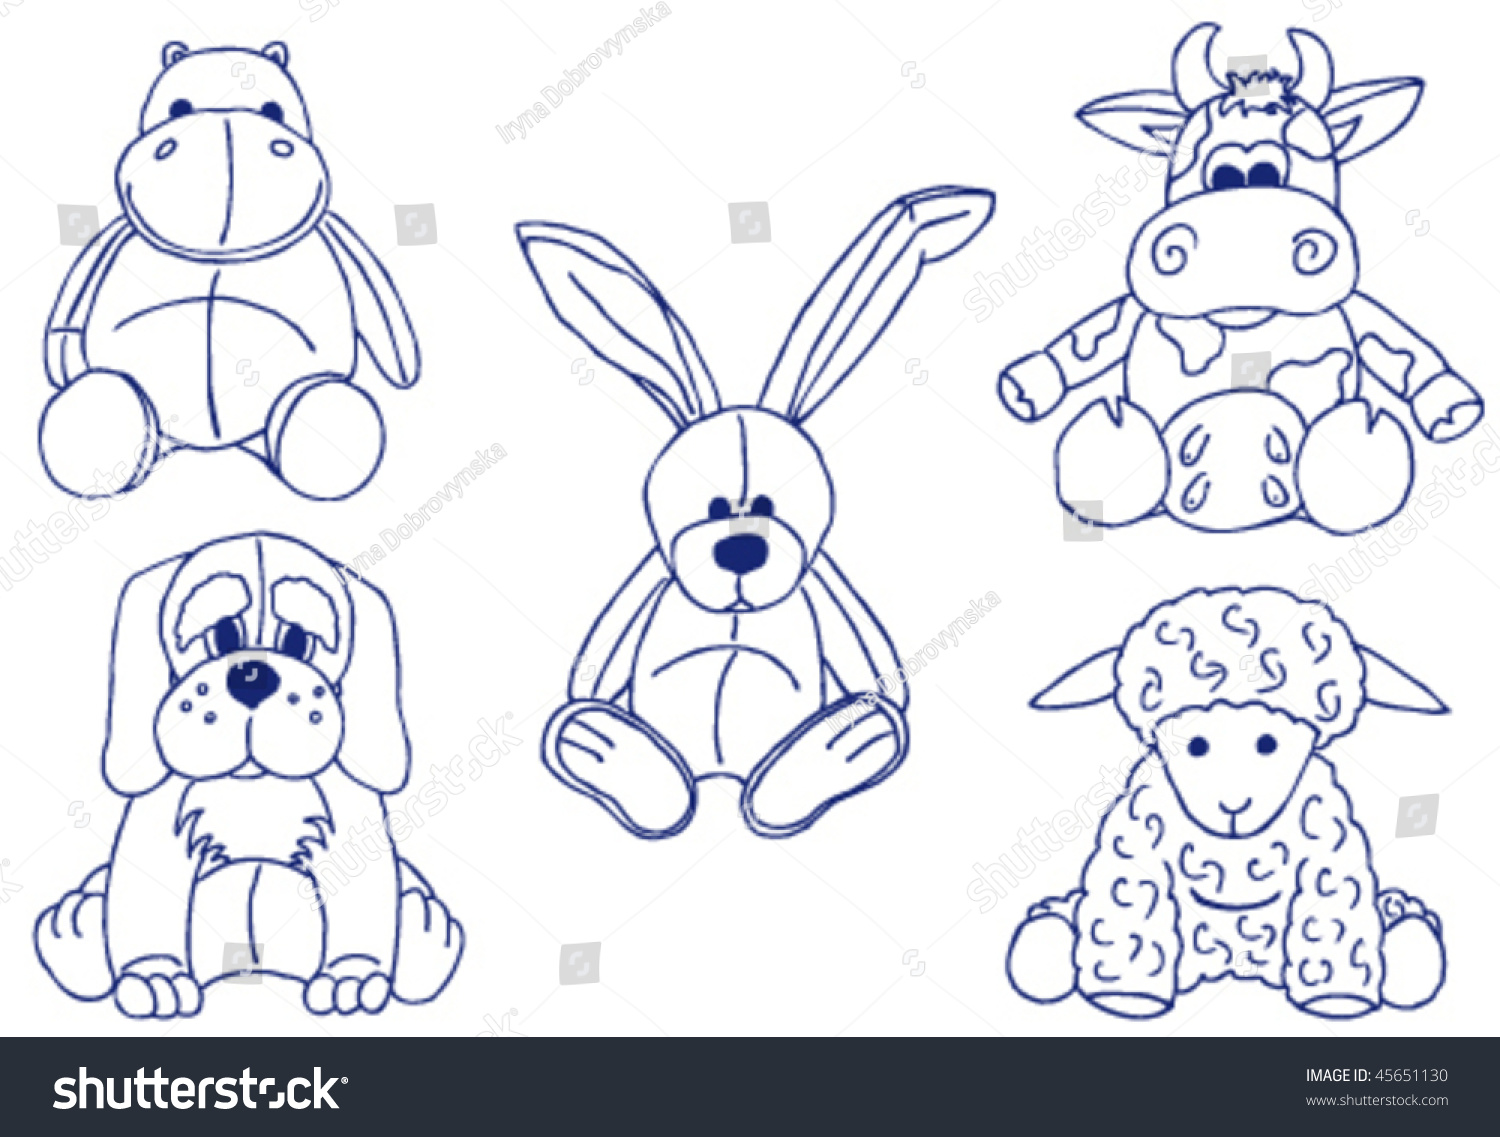 A Set Of HandDrawn Doodle With Different Plush Animal Toys Stock